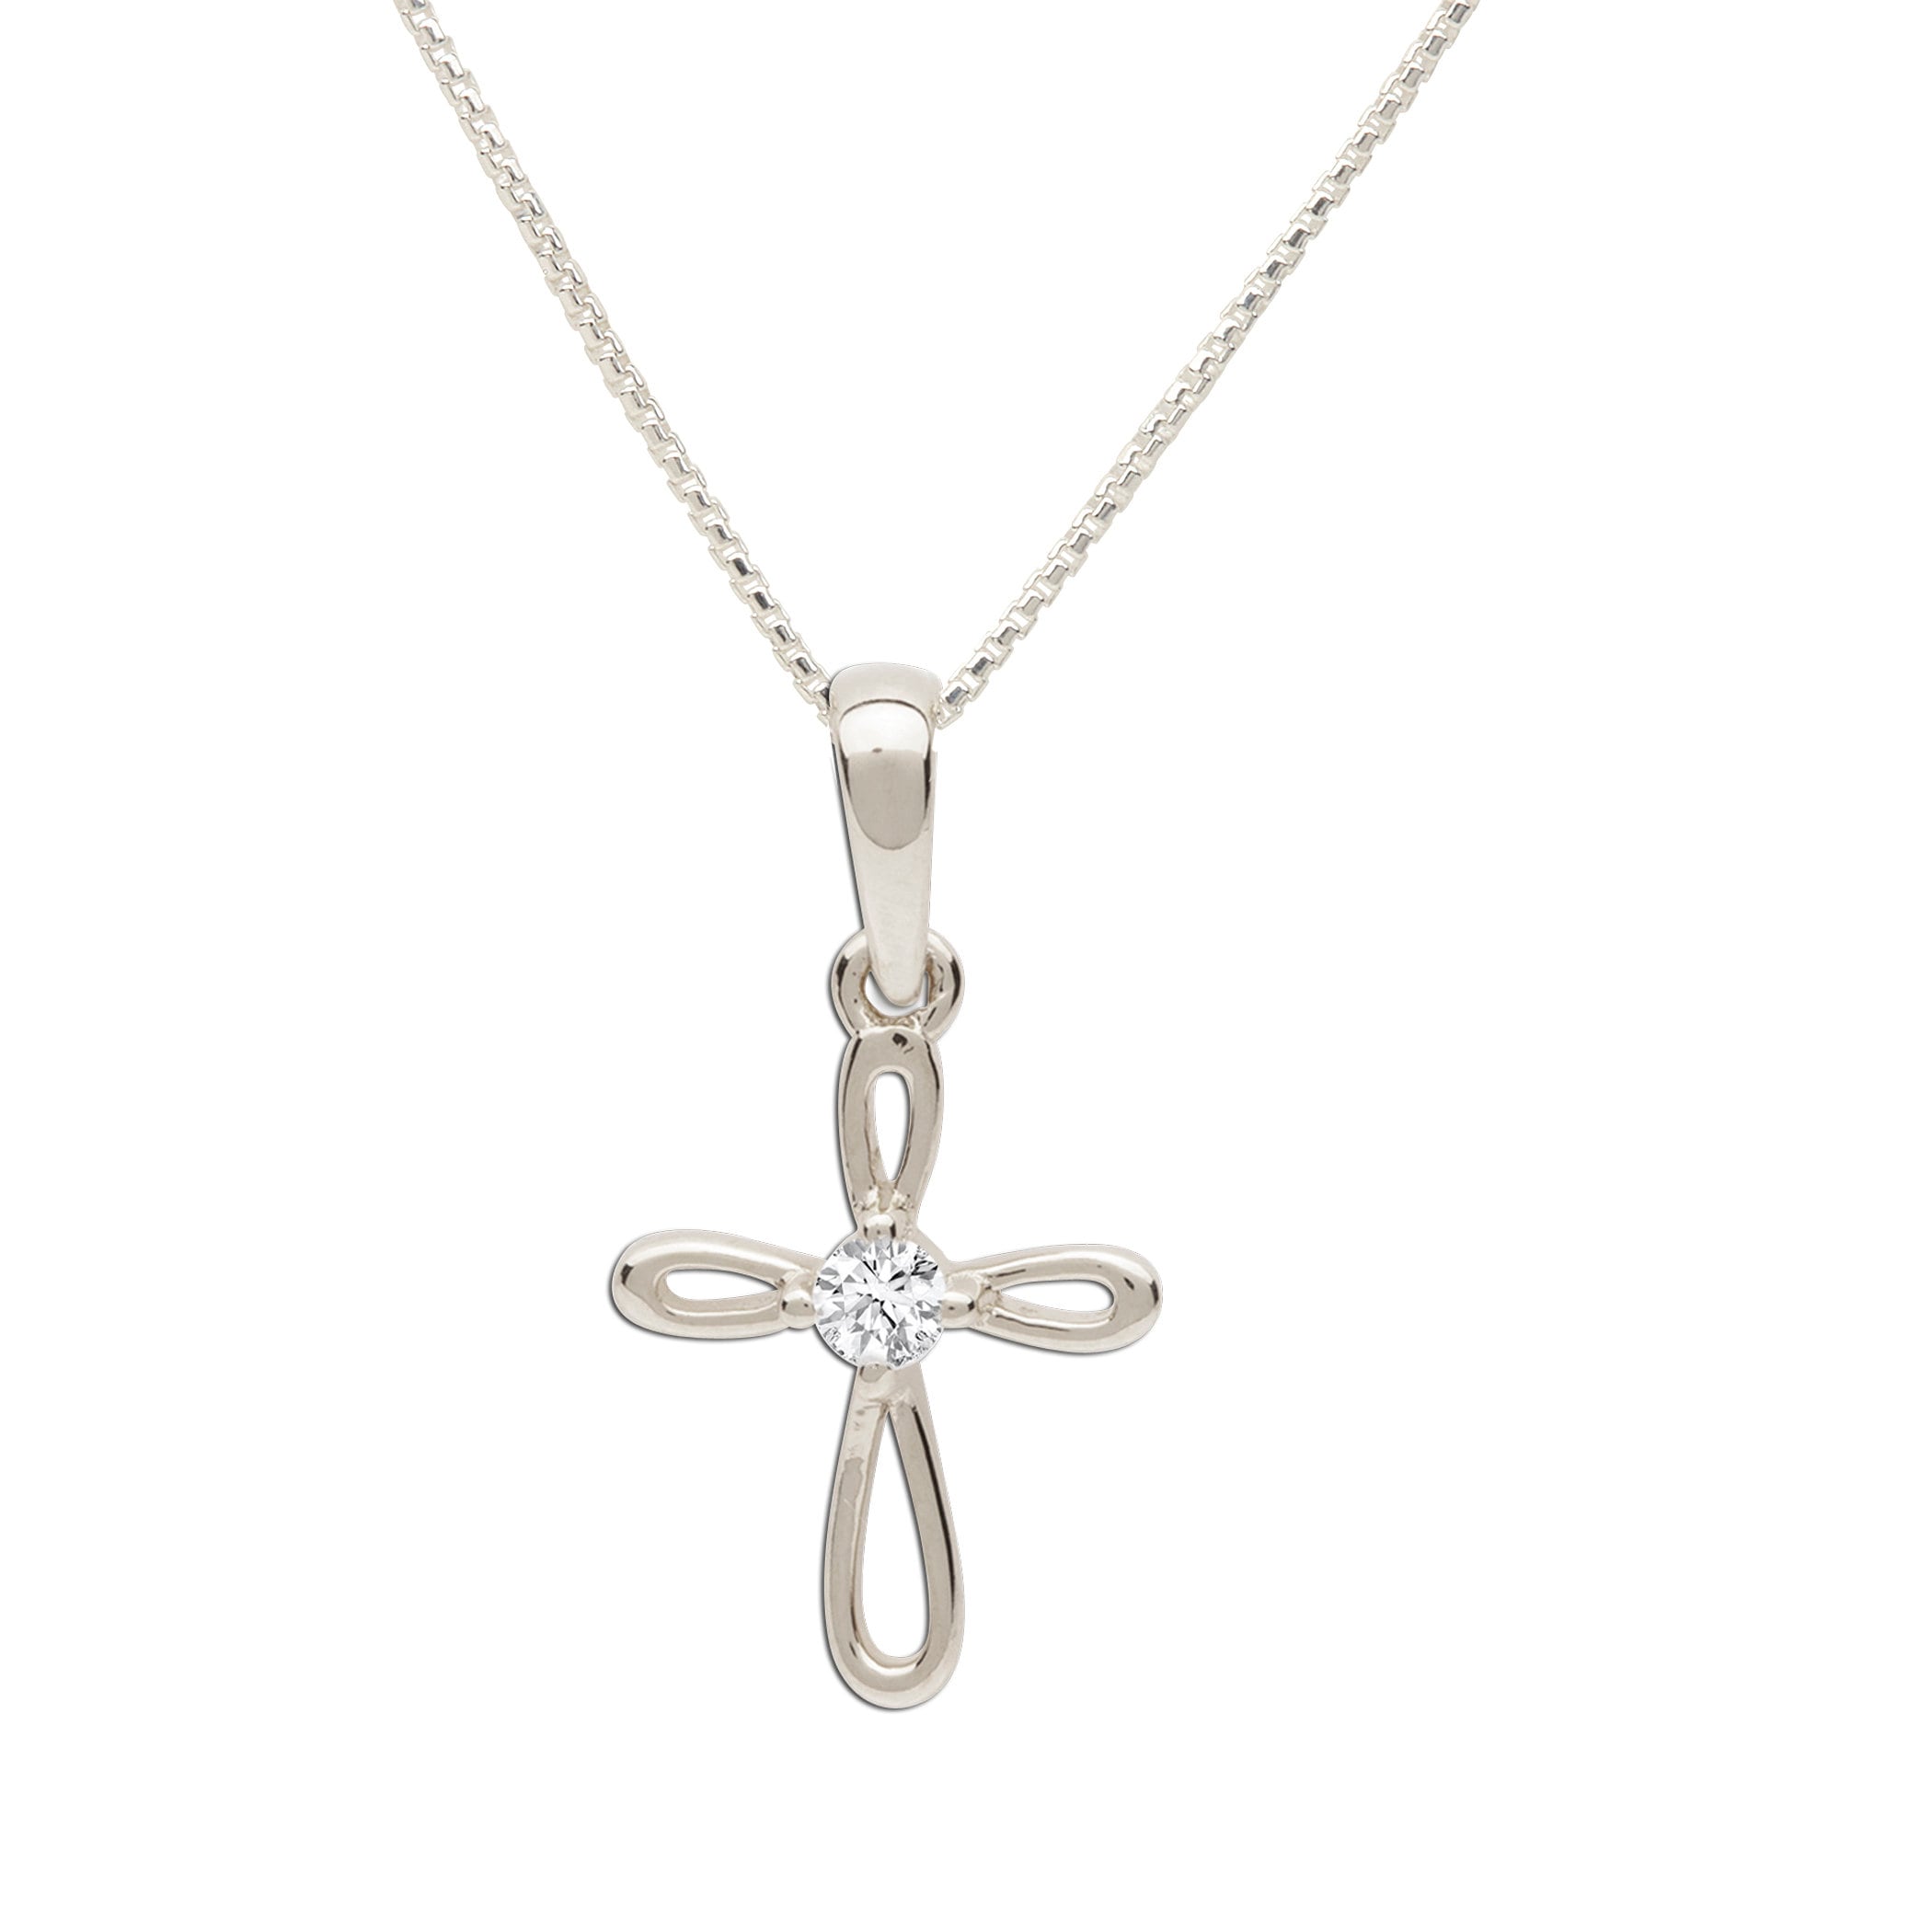 Girls Sterling Silver CZ Cross Necklace for First Holy Communion Gift